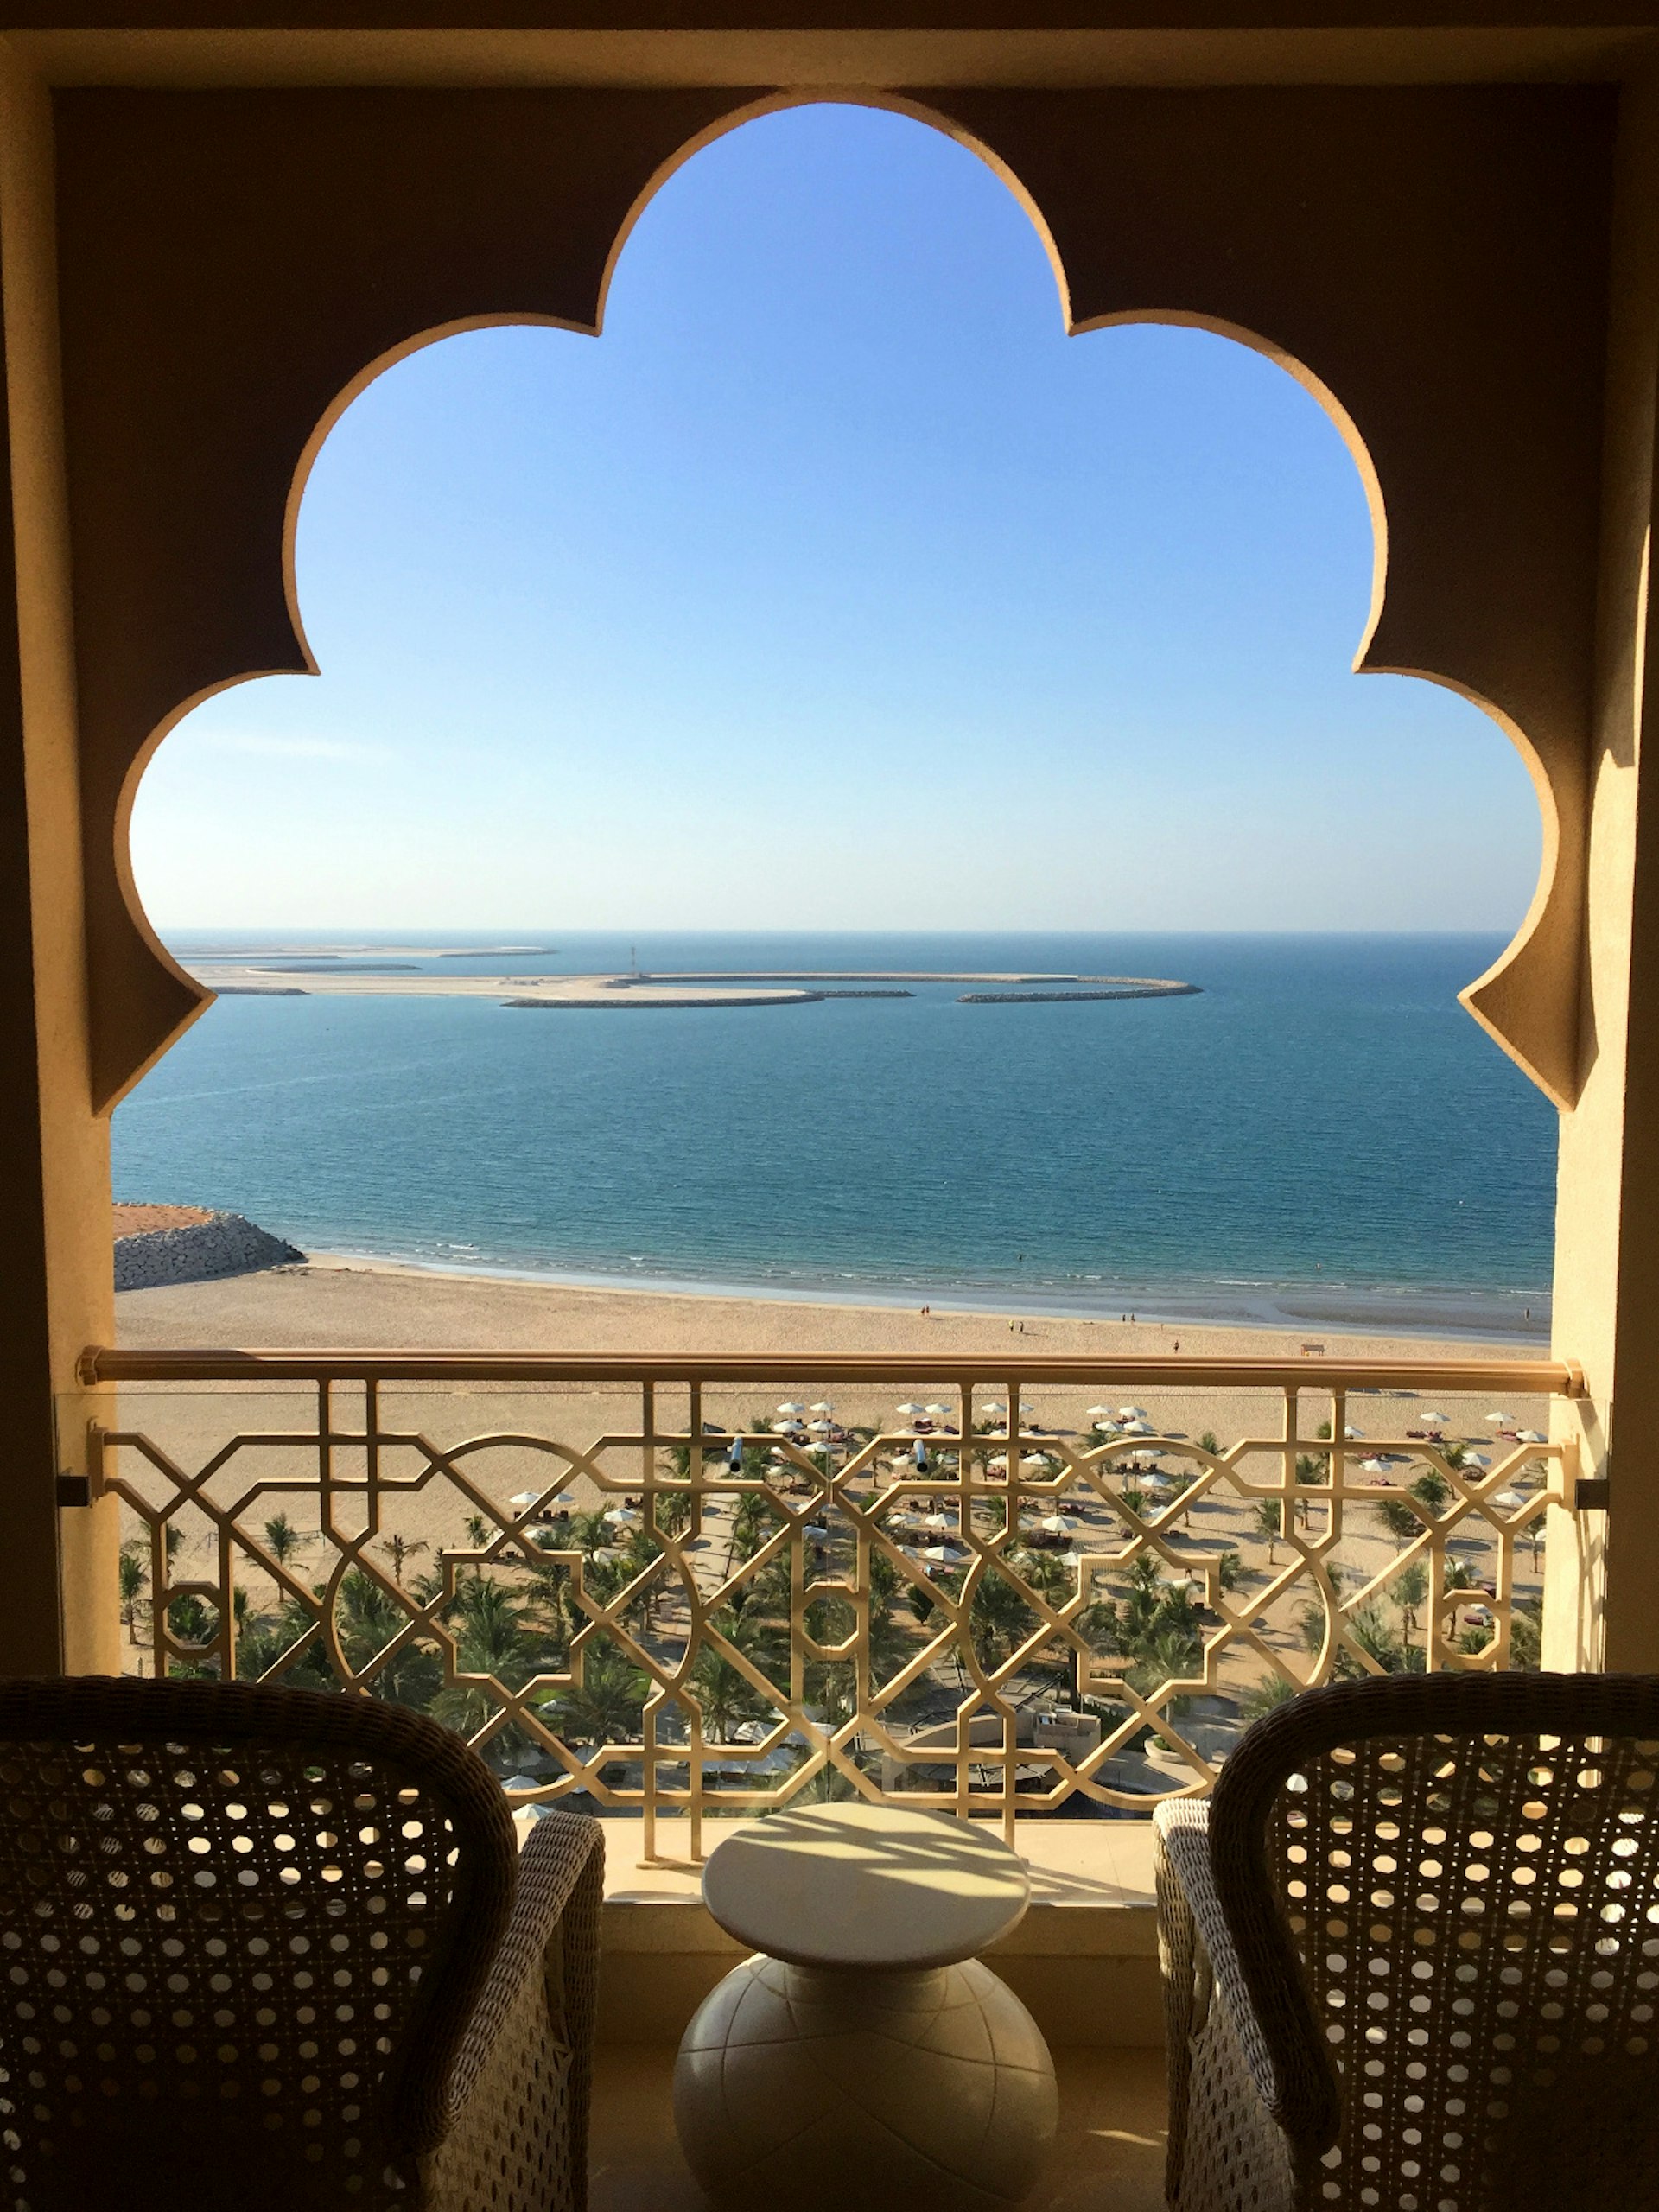 RAK offers adventure, but taking in Gulf views from a resort balcony is a great way to unwind. Image by Lauren Keith / Lonely Planet 